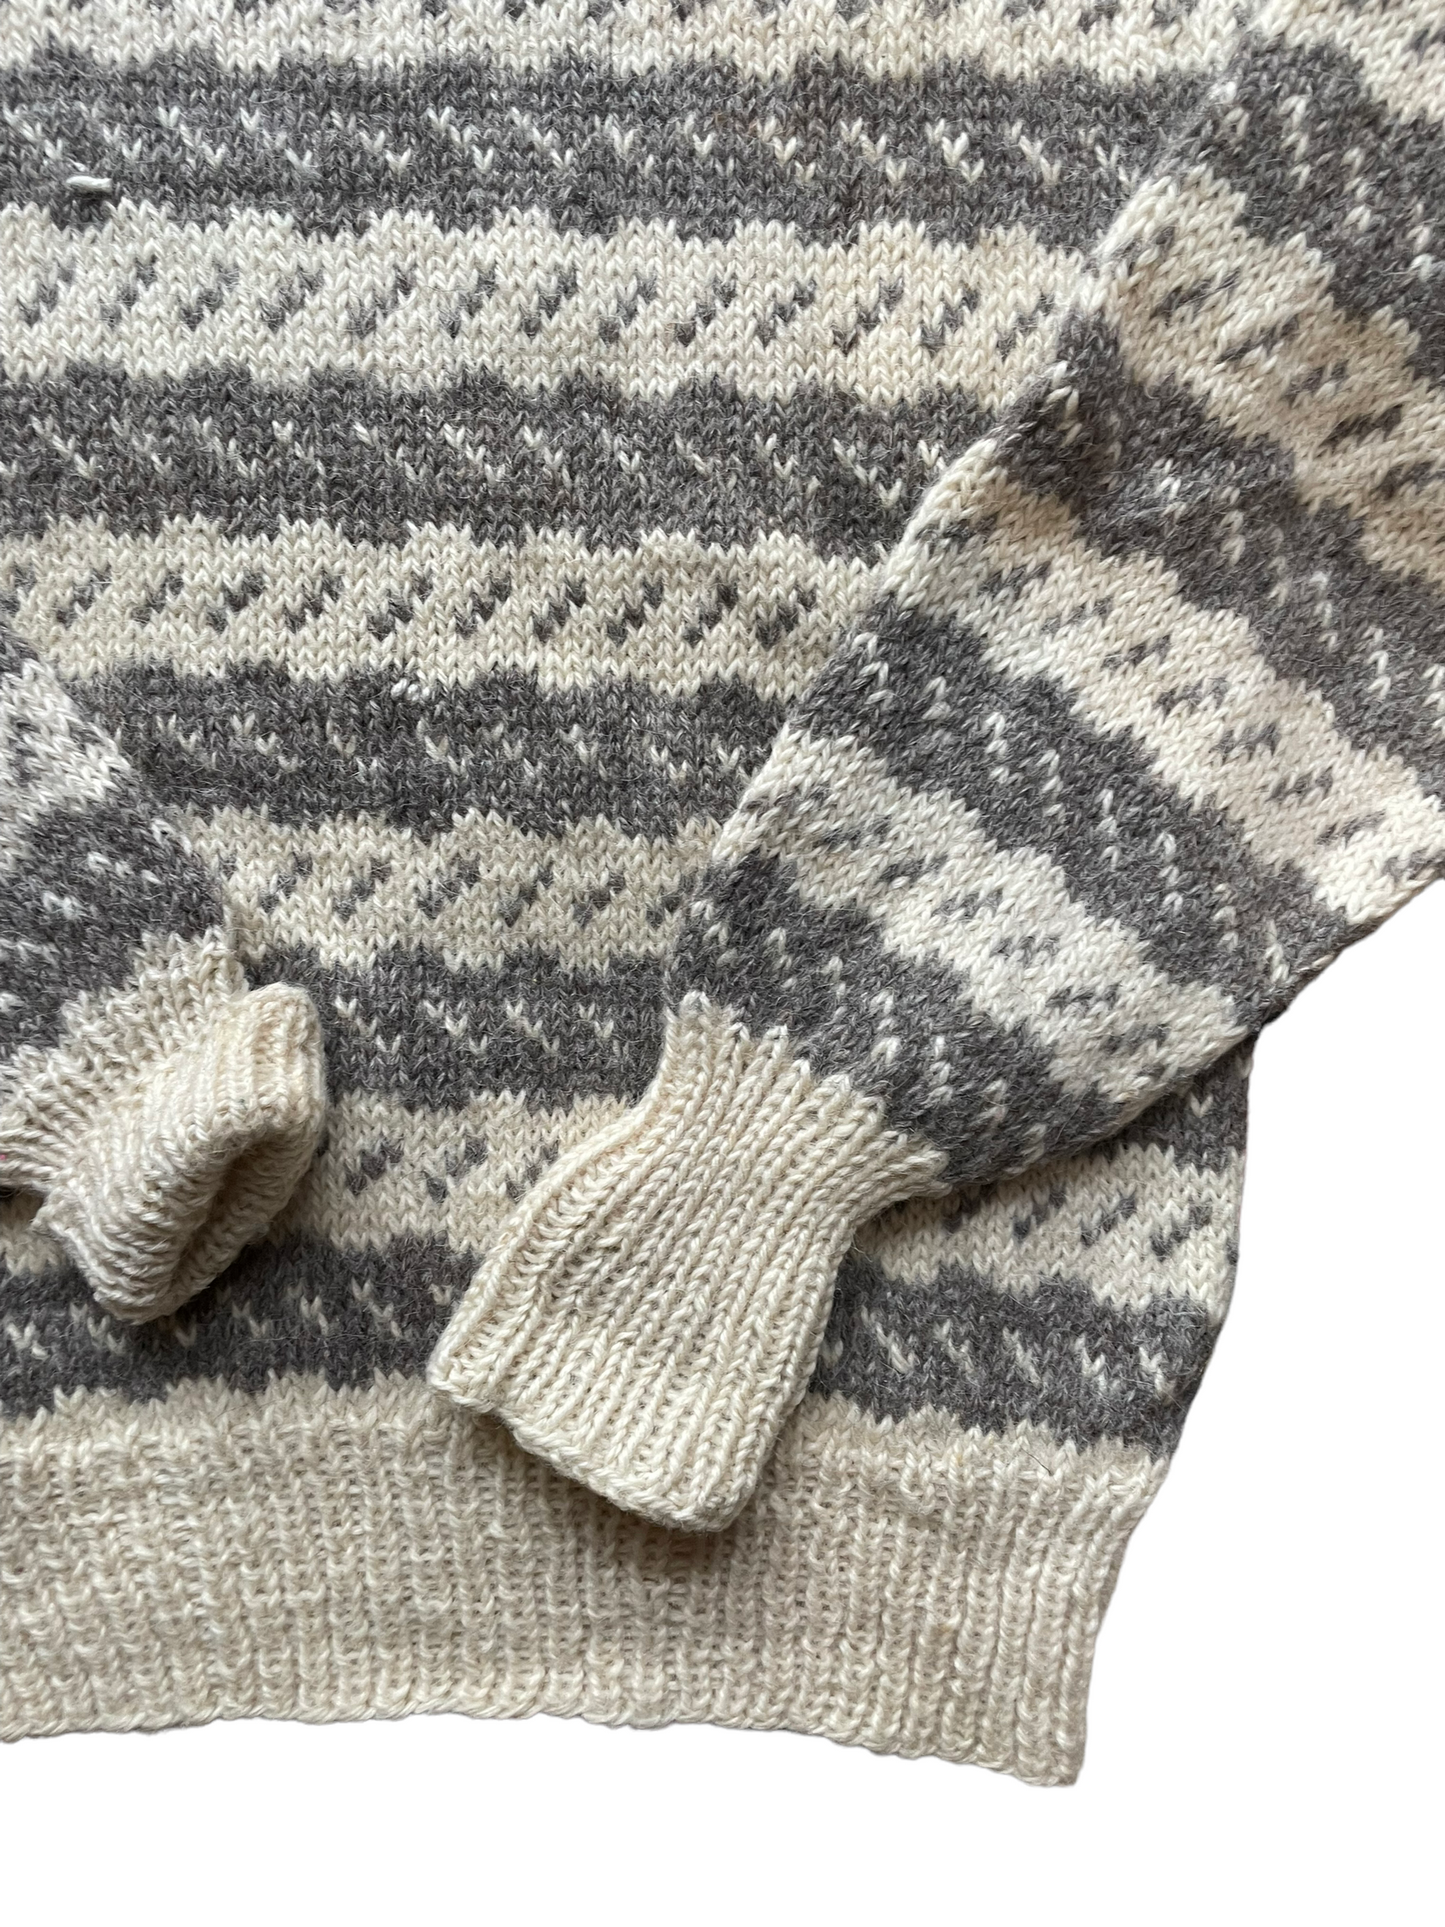 Vintage Wool Sweater Made in Denmark |  Barn Owl Seattle | Seattle Vintage Sweaters Sleeve close up with small discoloration.